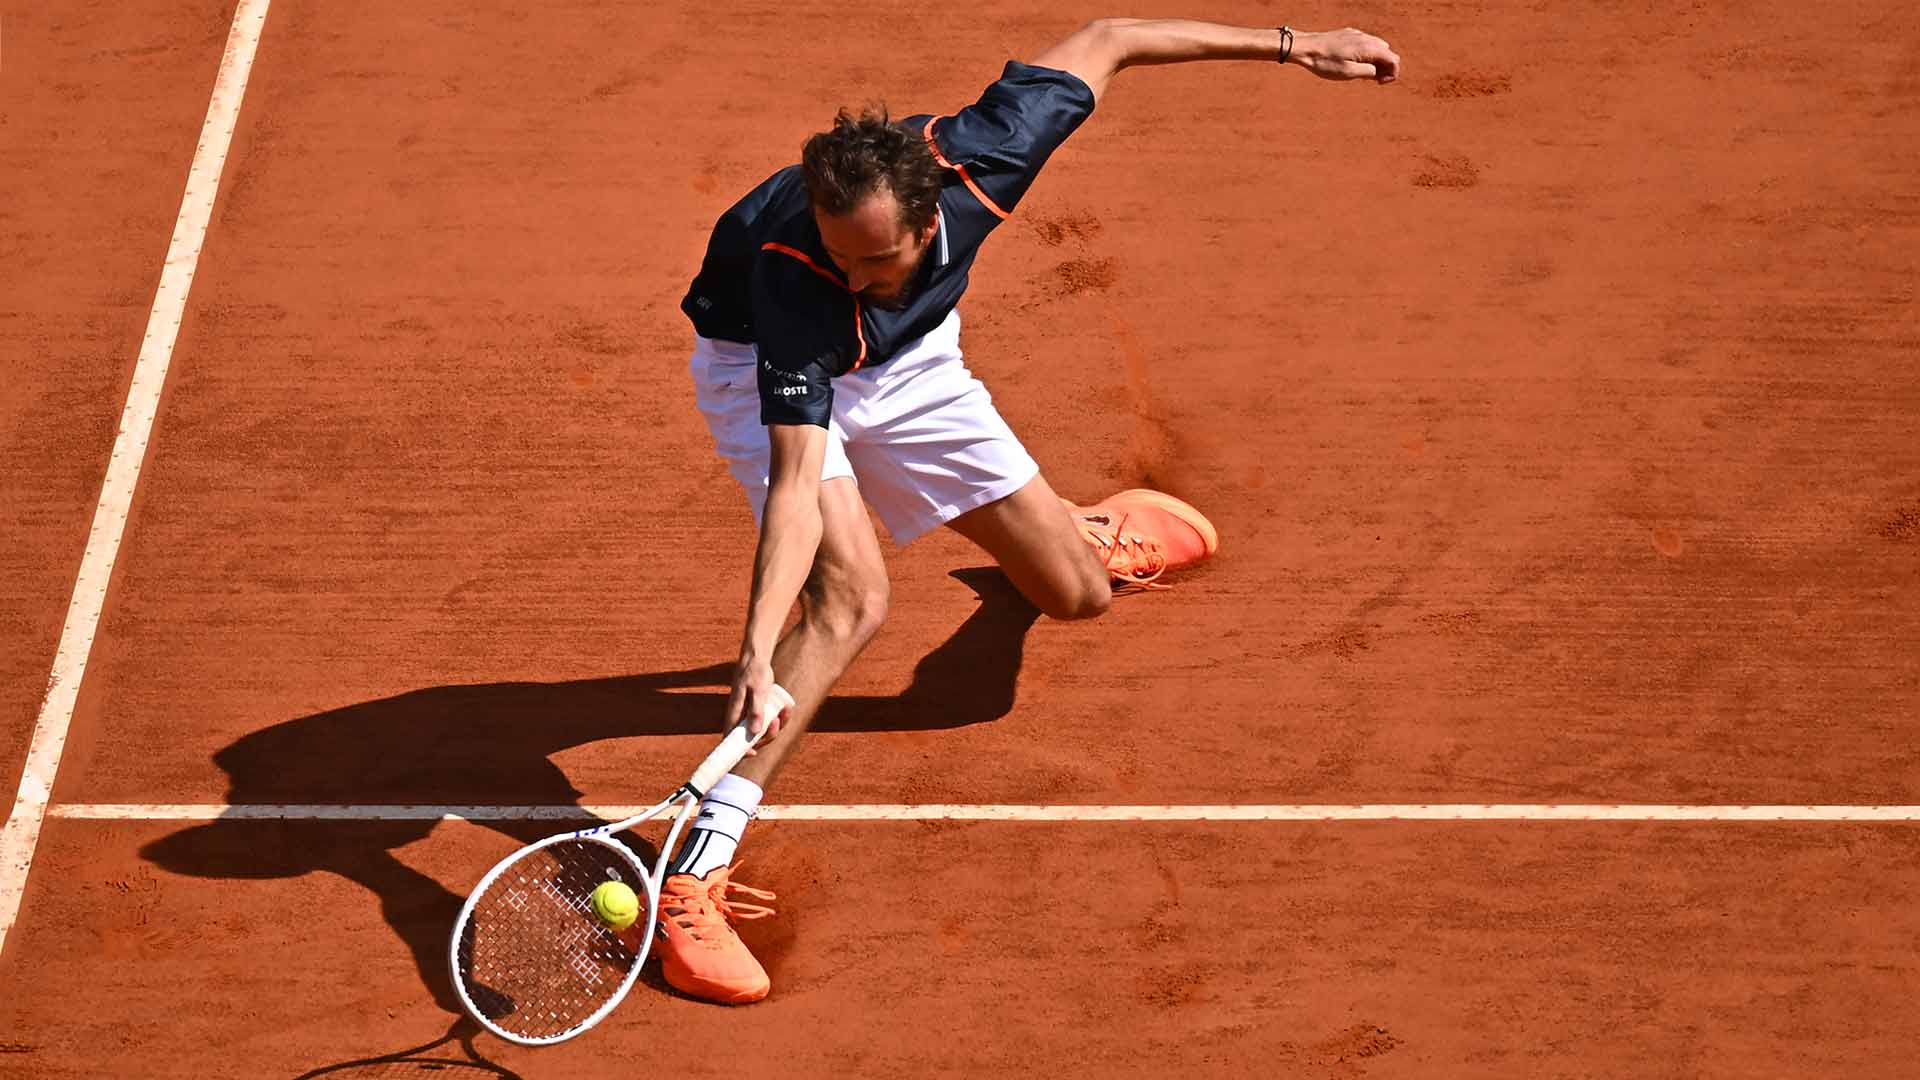 Easy day for the favorites in Monte Carlo - ATP Wednesday's Recap